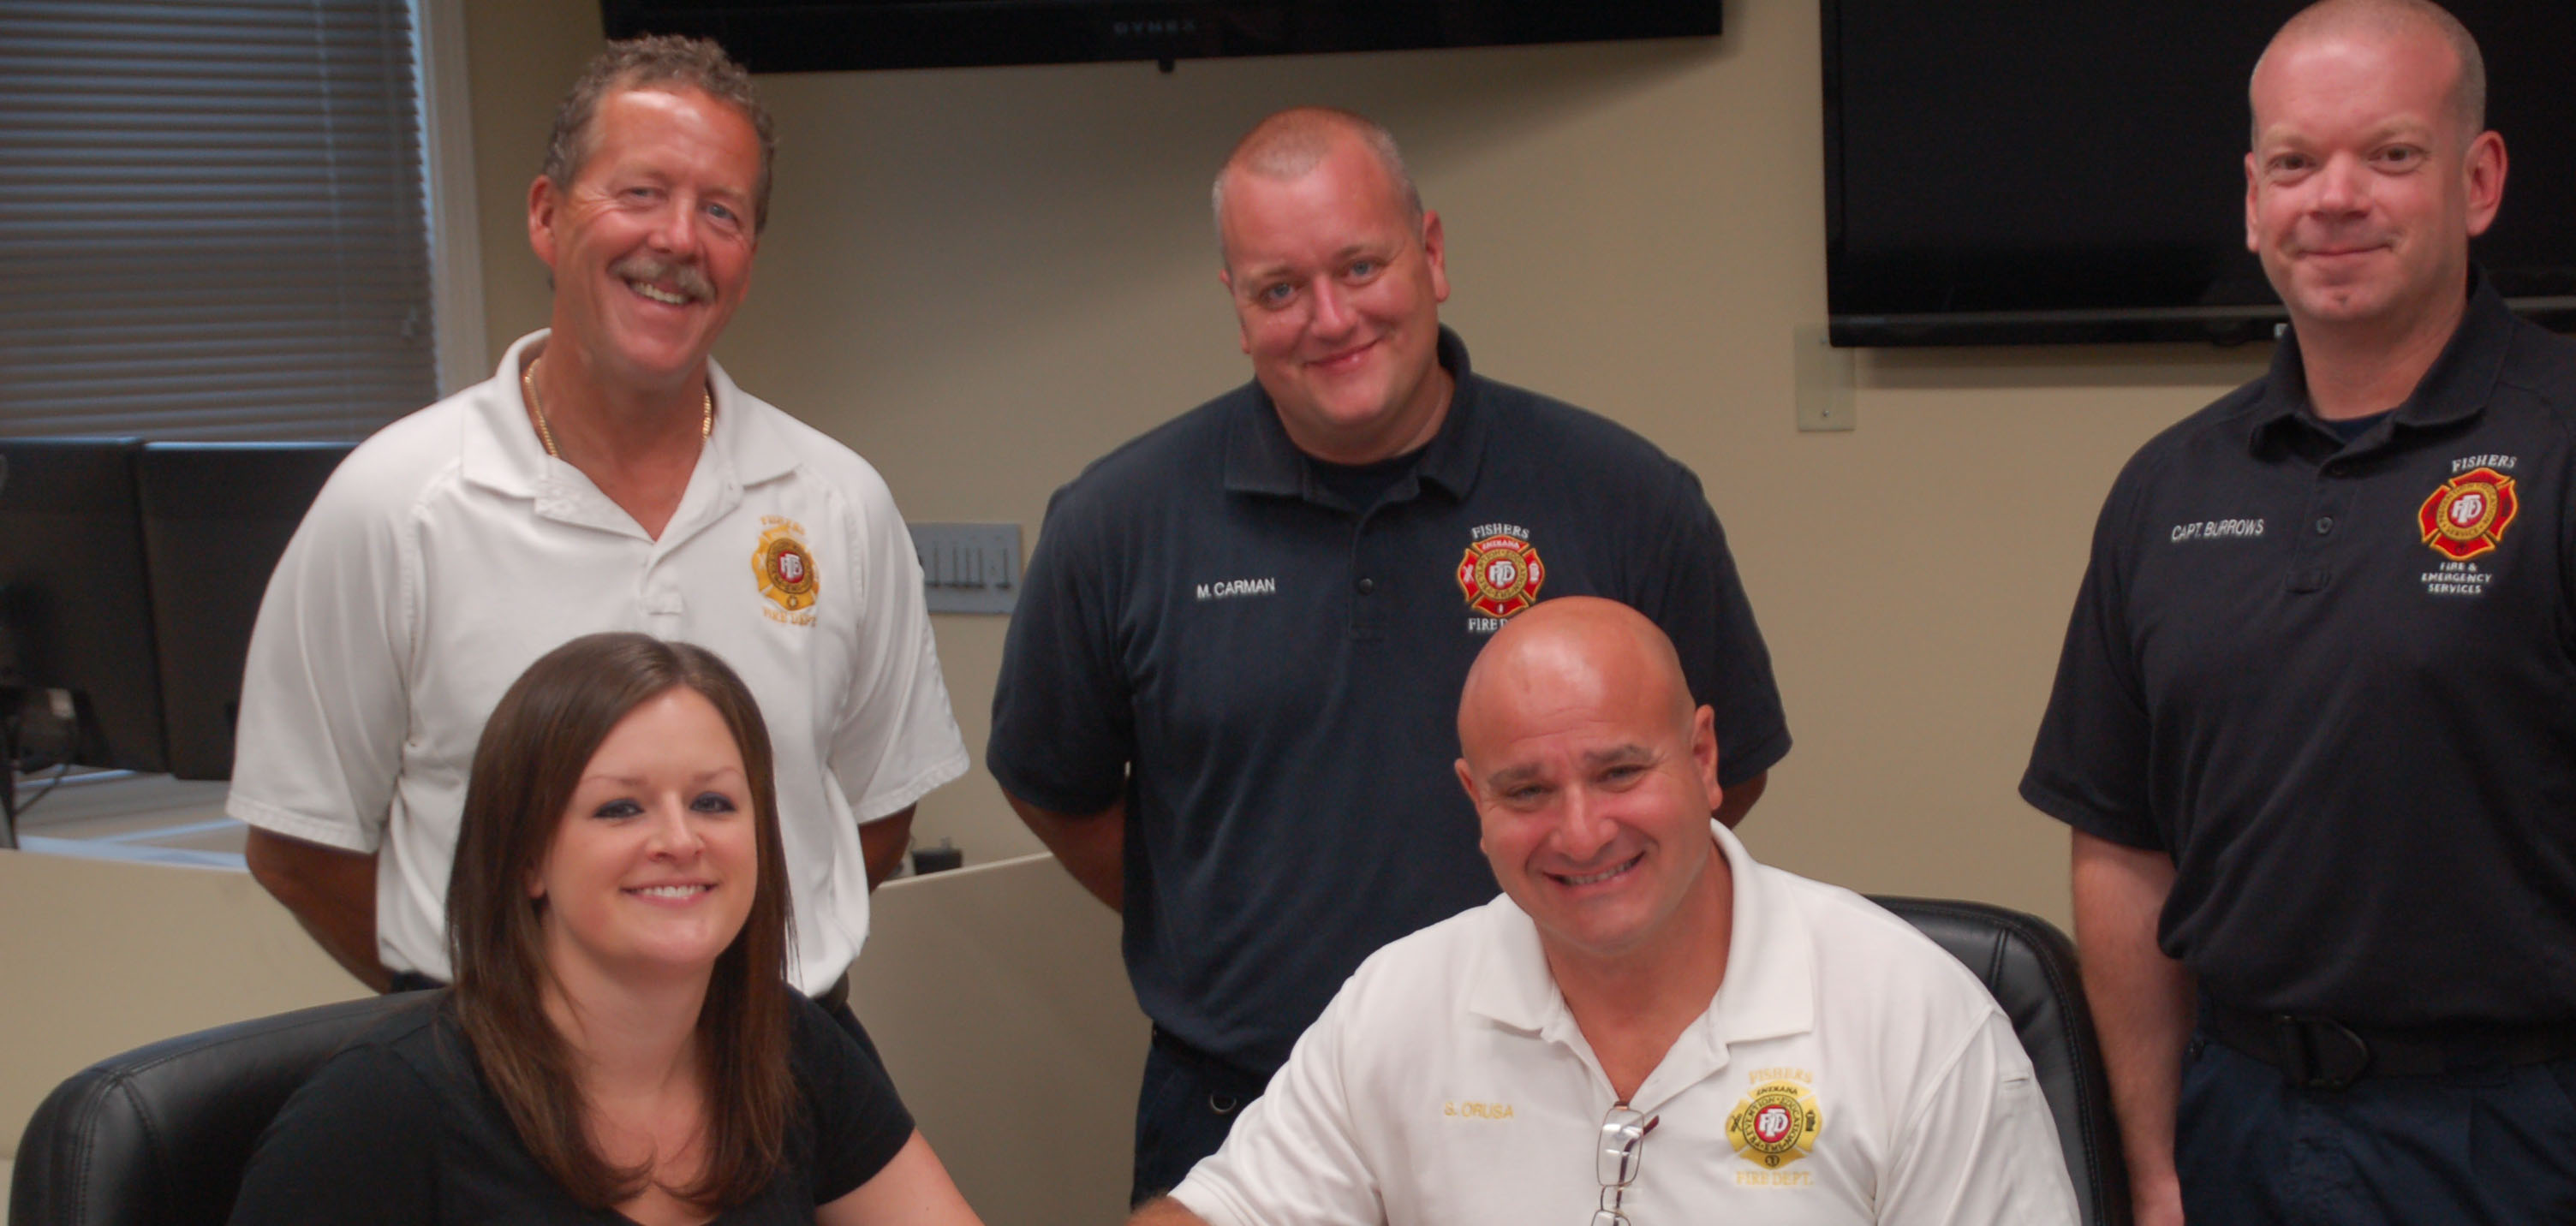 Indiana District Five Incident Management Team members, Back row L-R Deputy Chief Robin Nicoson, FF Mark Carman, Captain Jamie Burrows,Front row L-R Ann Smith, Chief Steven Orusa. (Submitted photo)